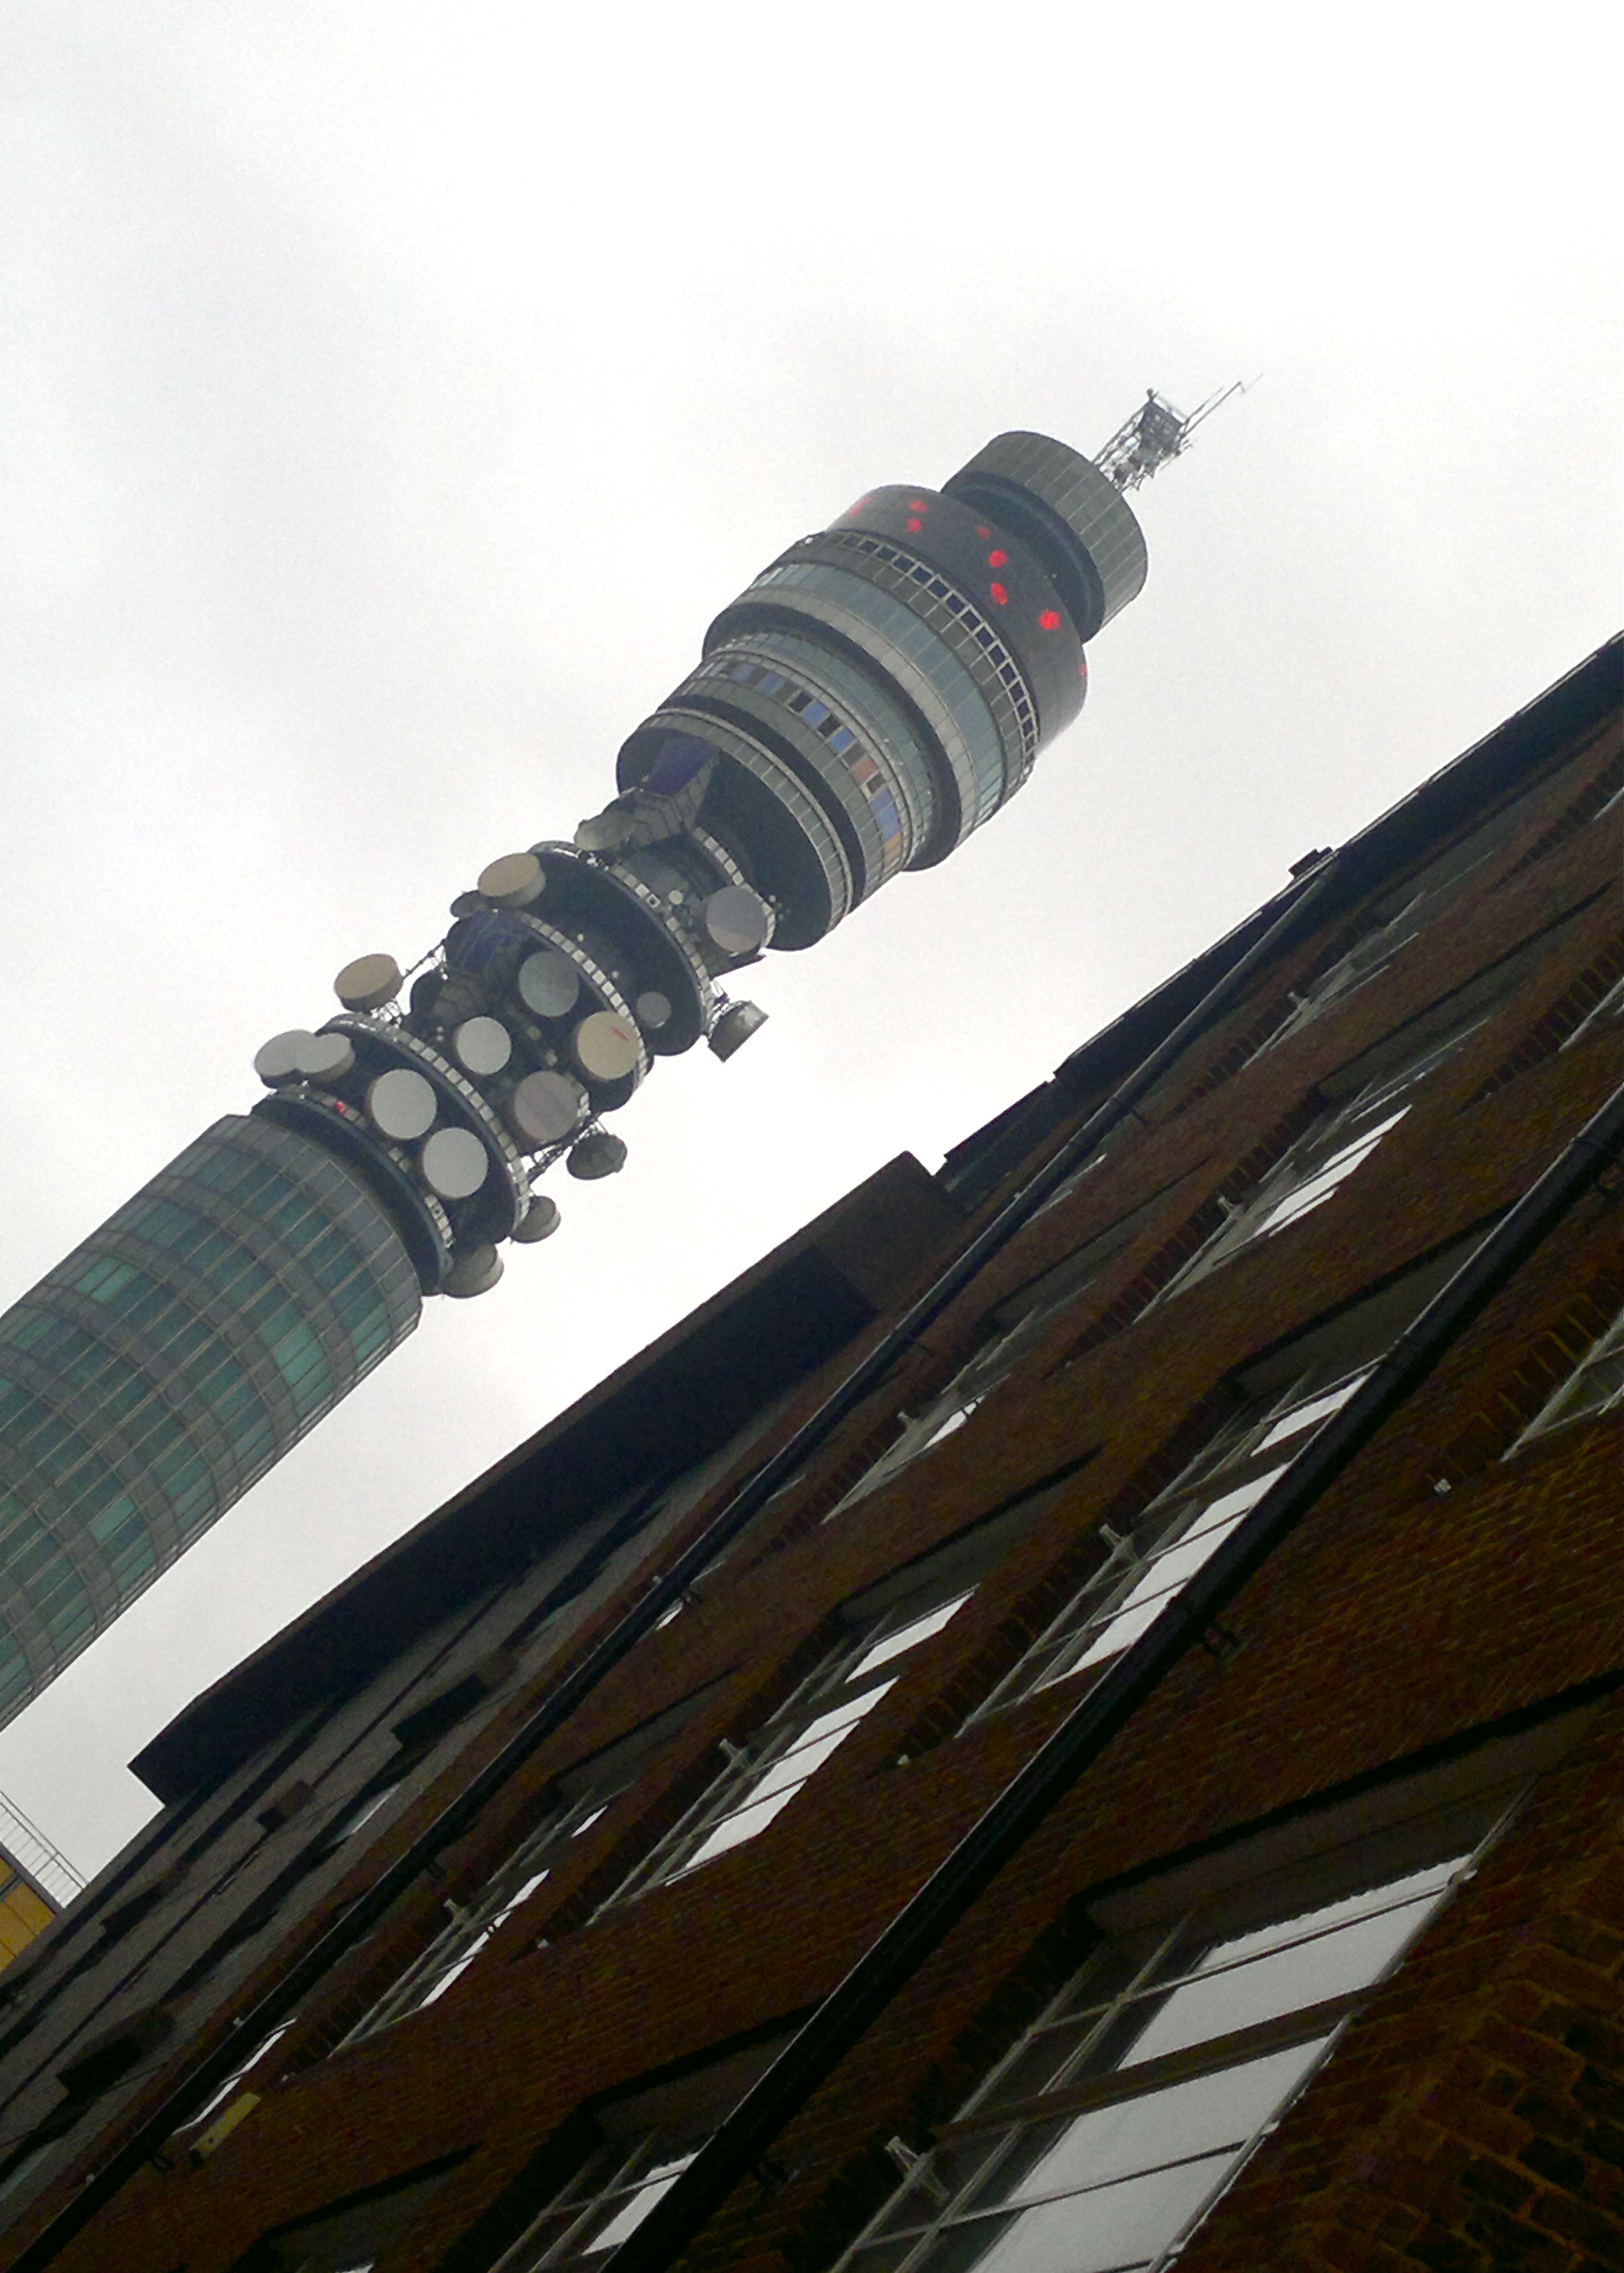 Listening - The Post Office Tower - London